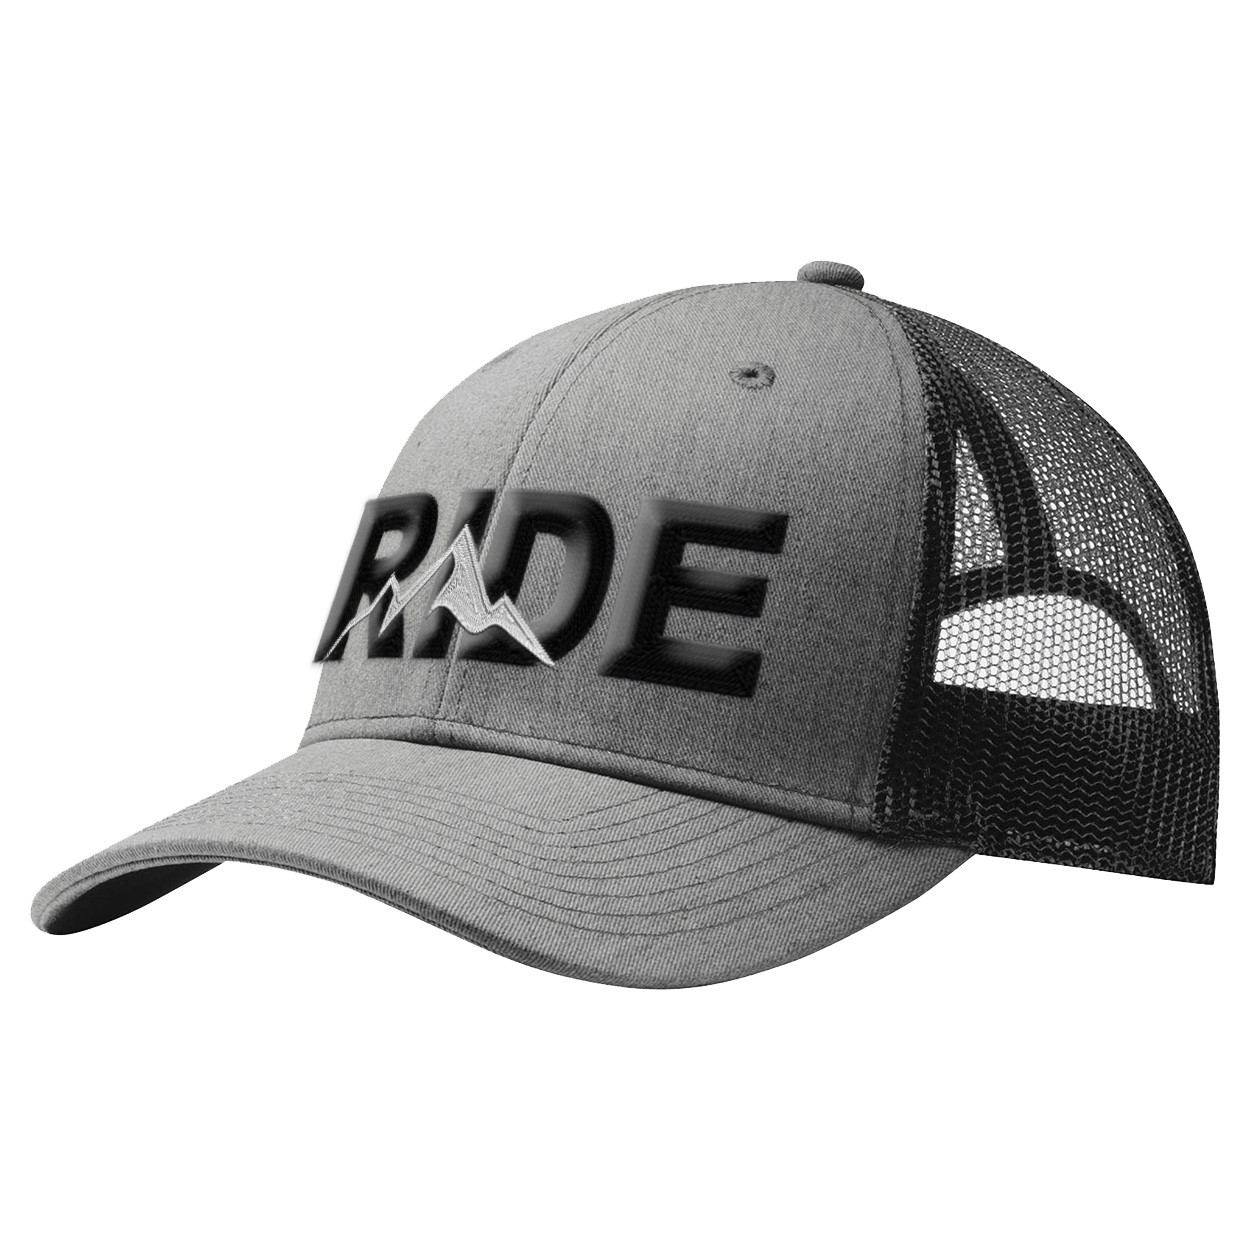 Ride Mountain Logo Classic Pro 3D Puff Embroidered Snapback Trucker Hat Heather Gray/Black